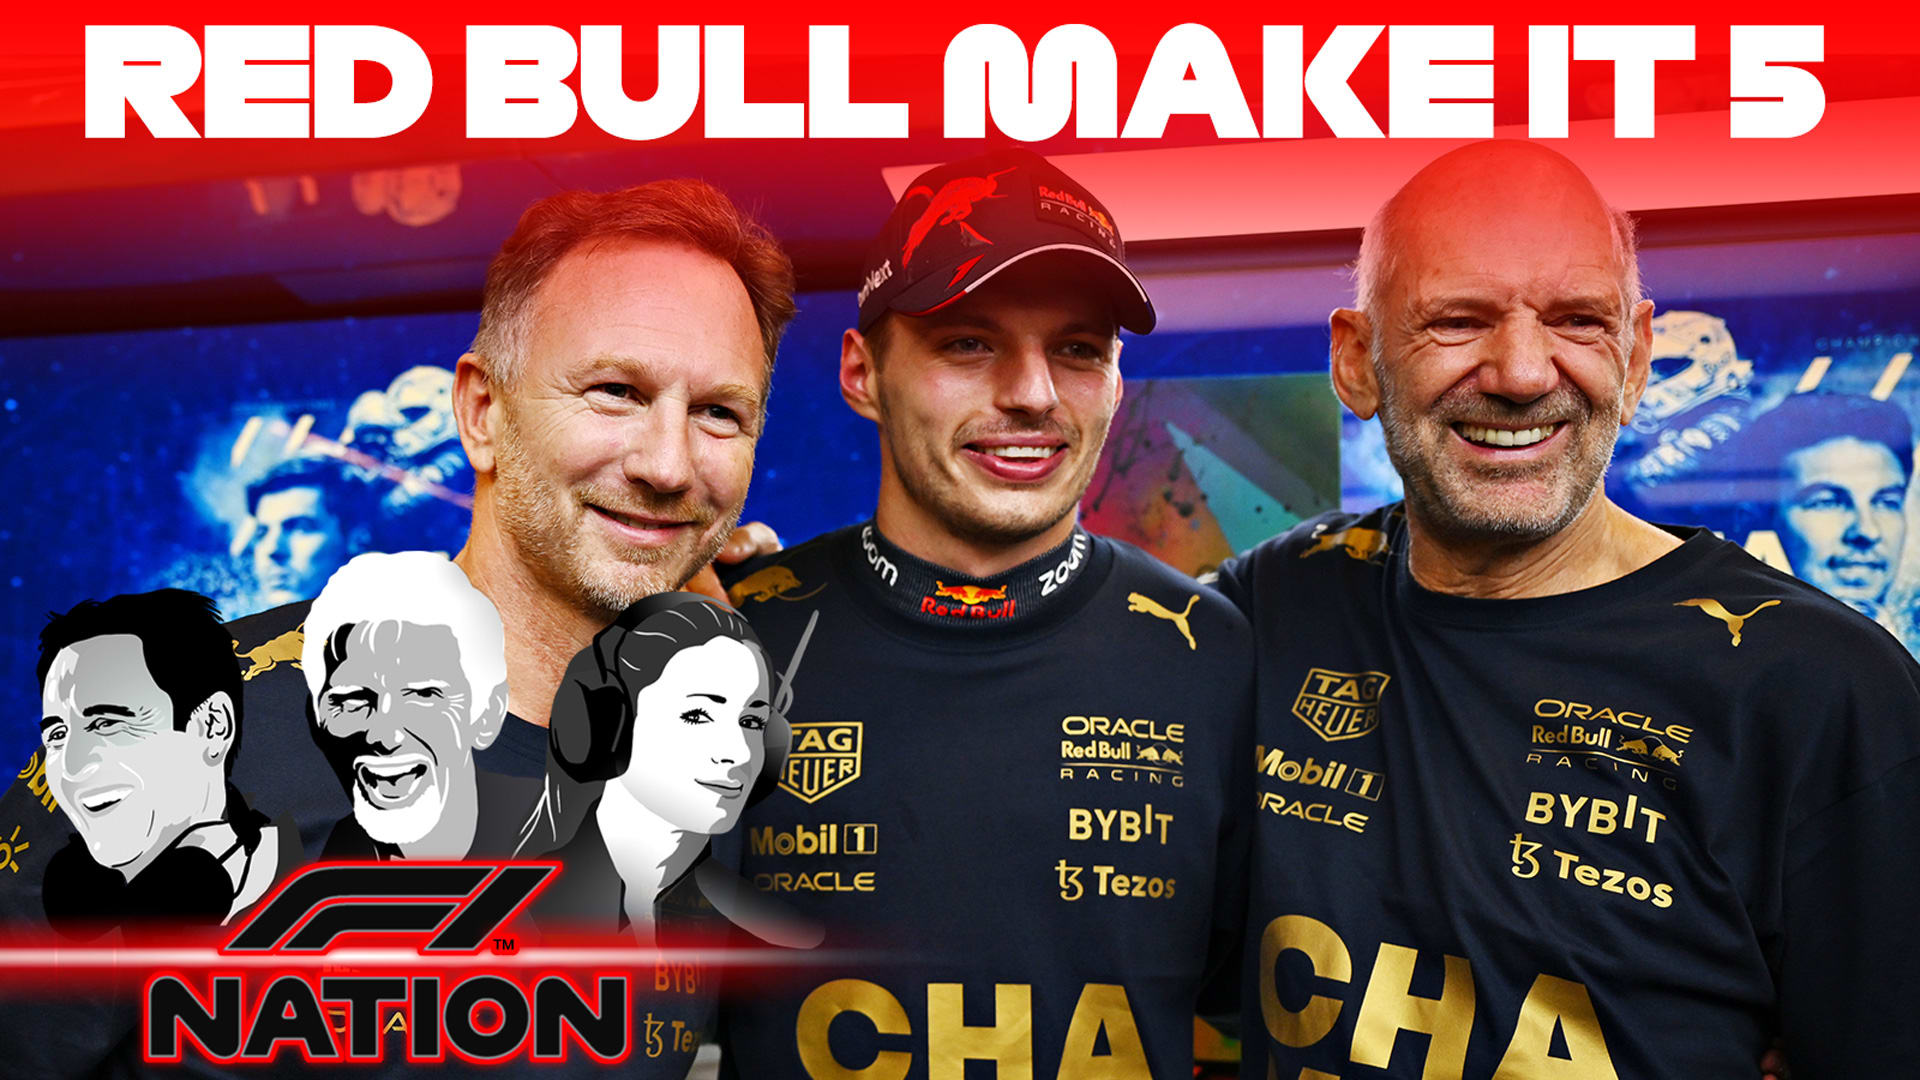 F1 NATION: A bumper episode as Red Bull celebrate their fifth constructors' title with Texas win - Formula 1